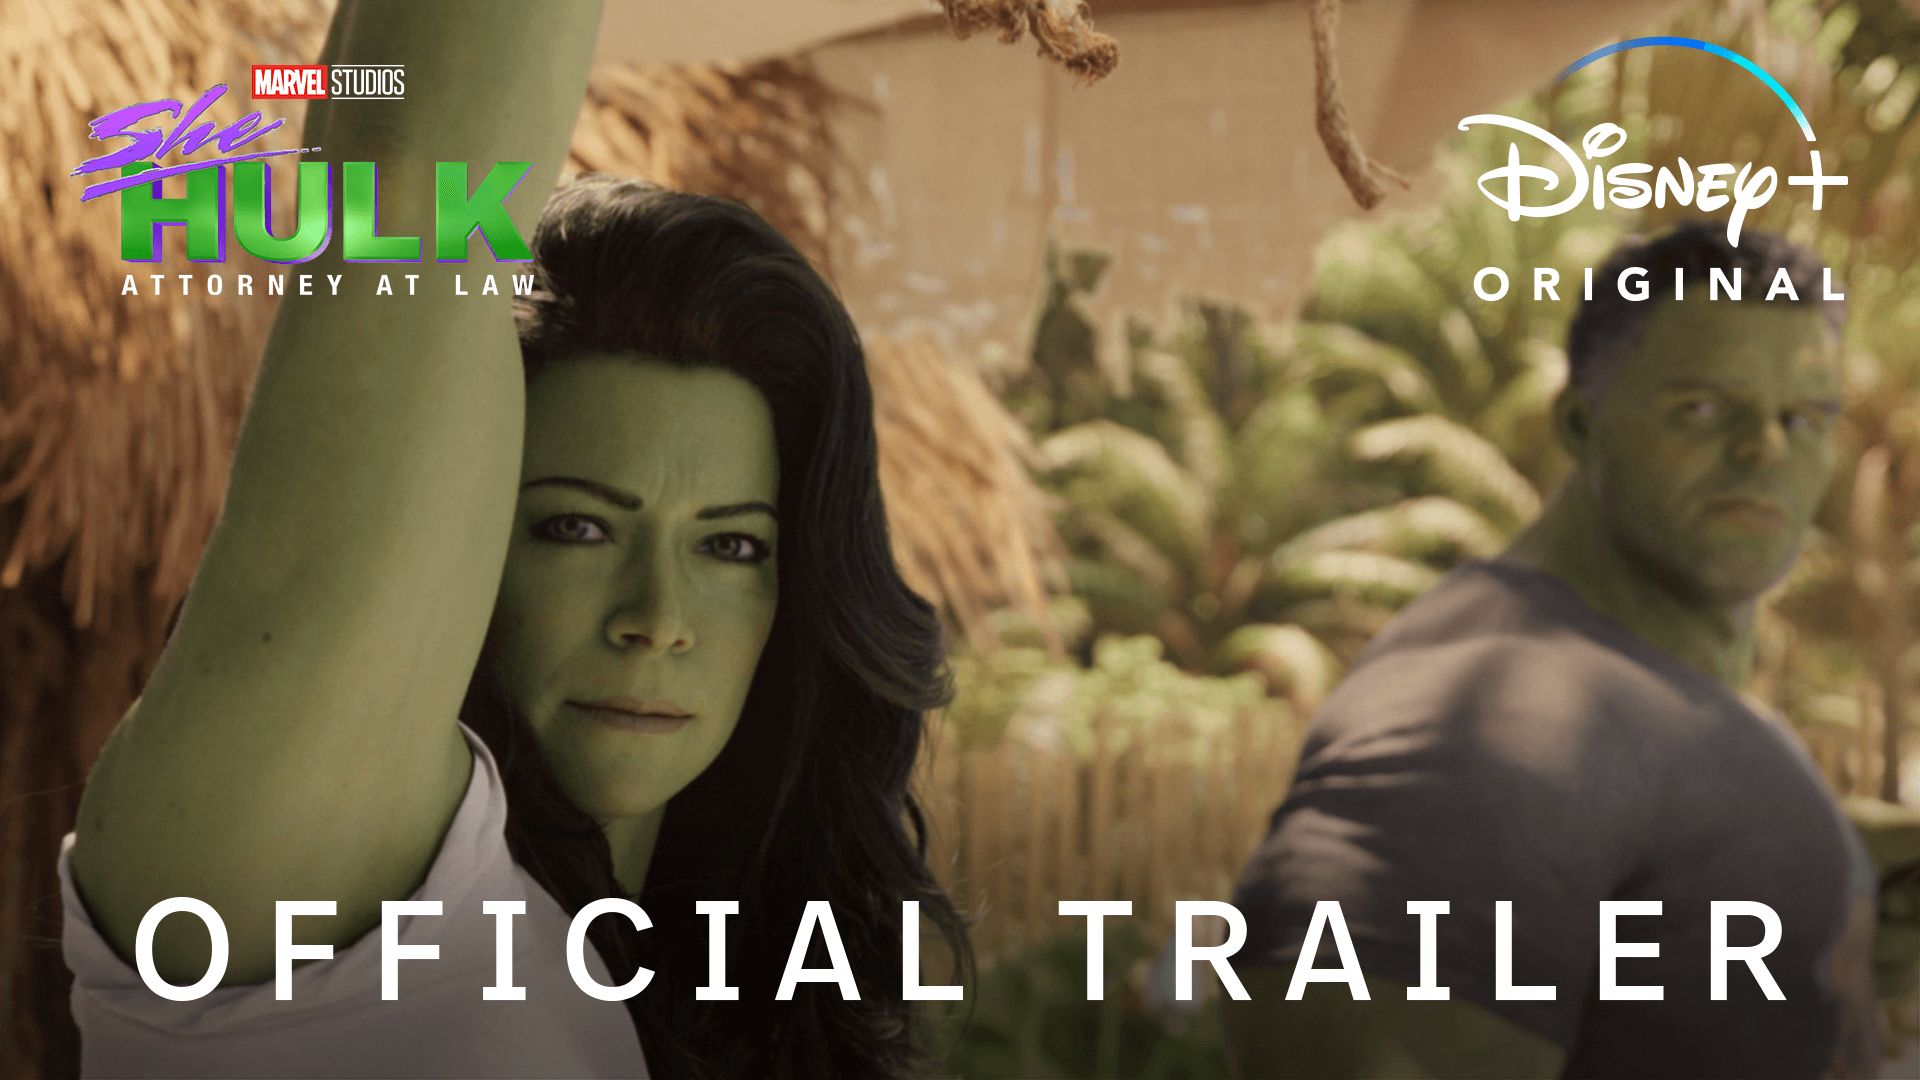 SHE-HULK | ATTORNEY AT LAW: OFFICIAL TRAILER